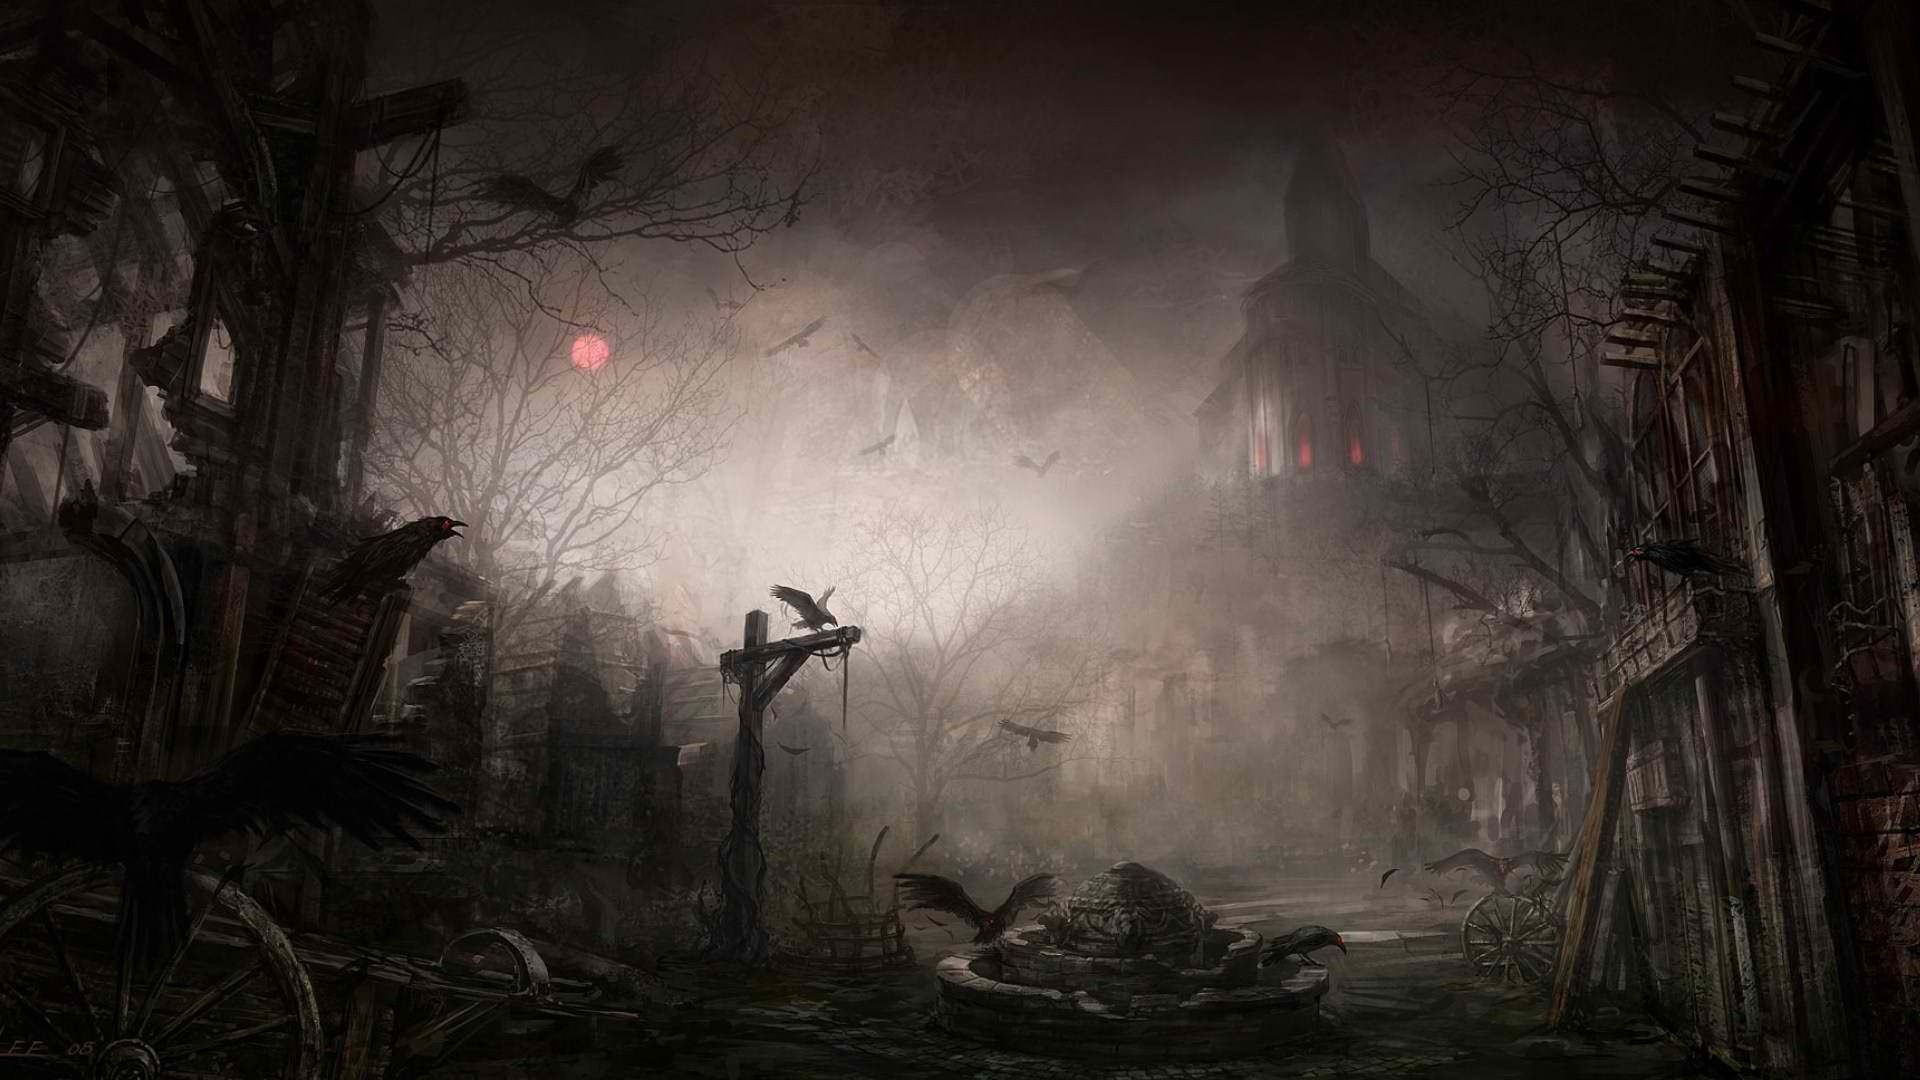 Scary Halloween HD Wallpapers